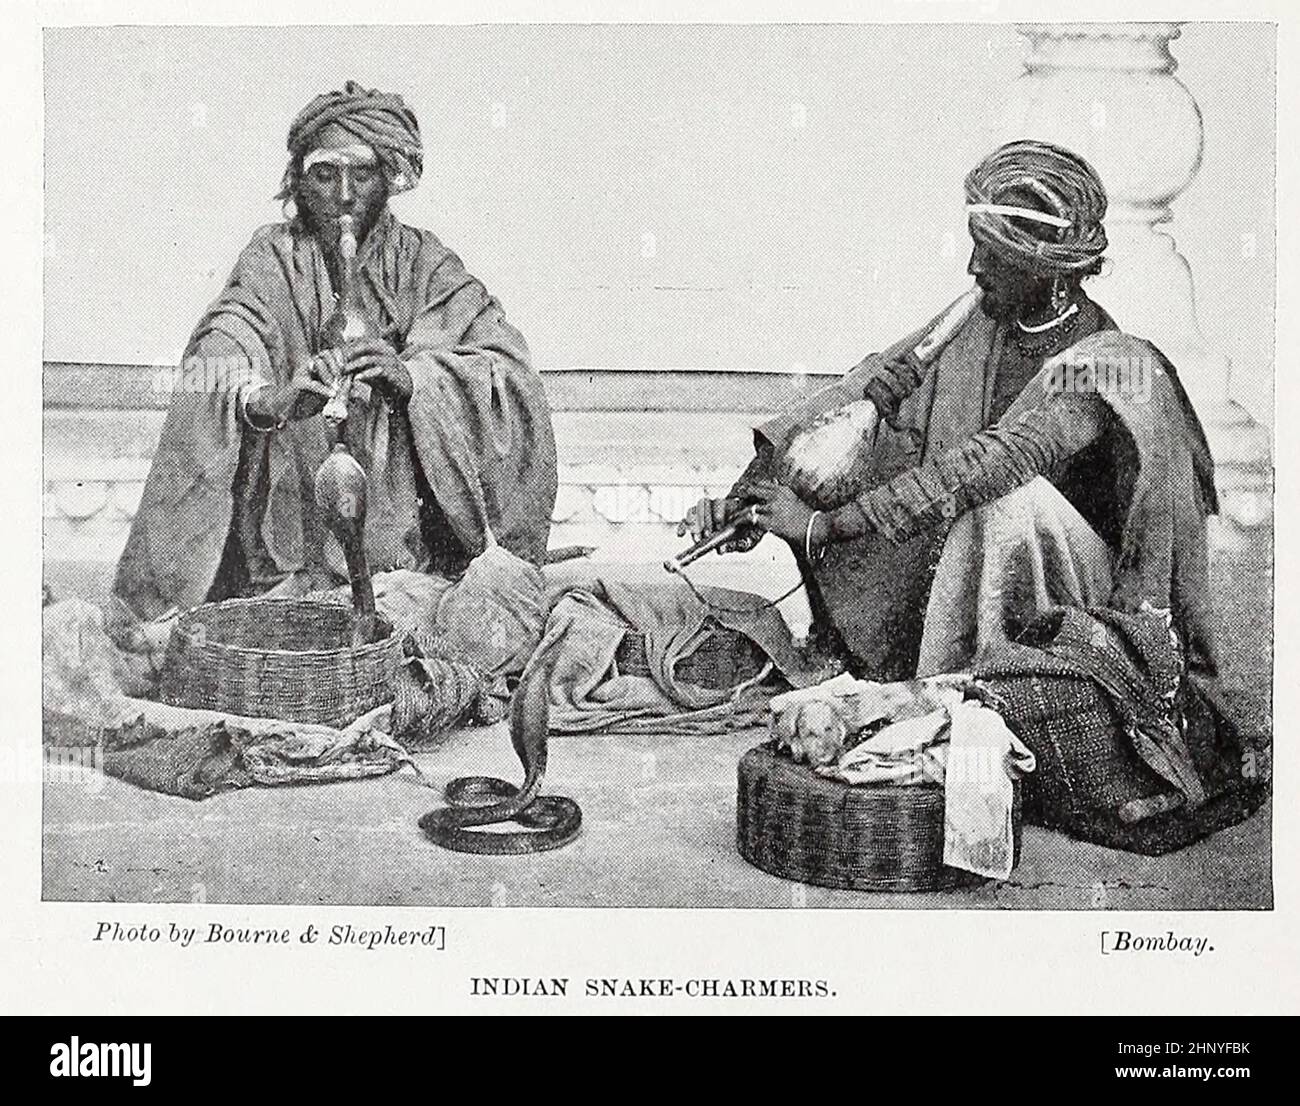 Indian snake-charmers from The living races of mankind : a popular illustrated account of the customs, habits, pursuits, feasts & ceremonies of the races of mankind throughout the world Volume 1 by Sir Harry Hamilton Johnston, Henry Neville Hutchinson, Richard Lydekker and Dr. A. H. Keane published London : Hutchinson & Co. 1902 Stock Photo